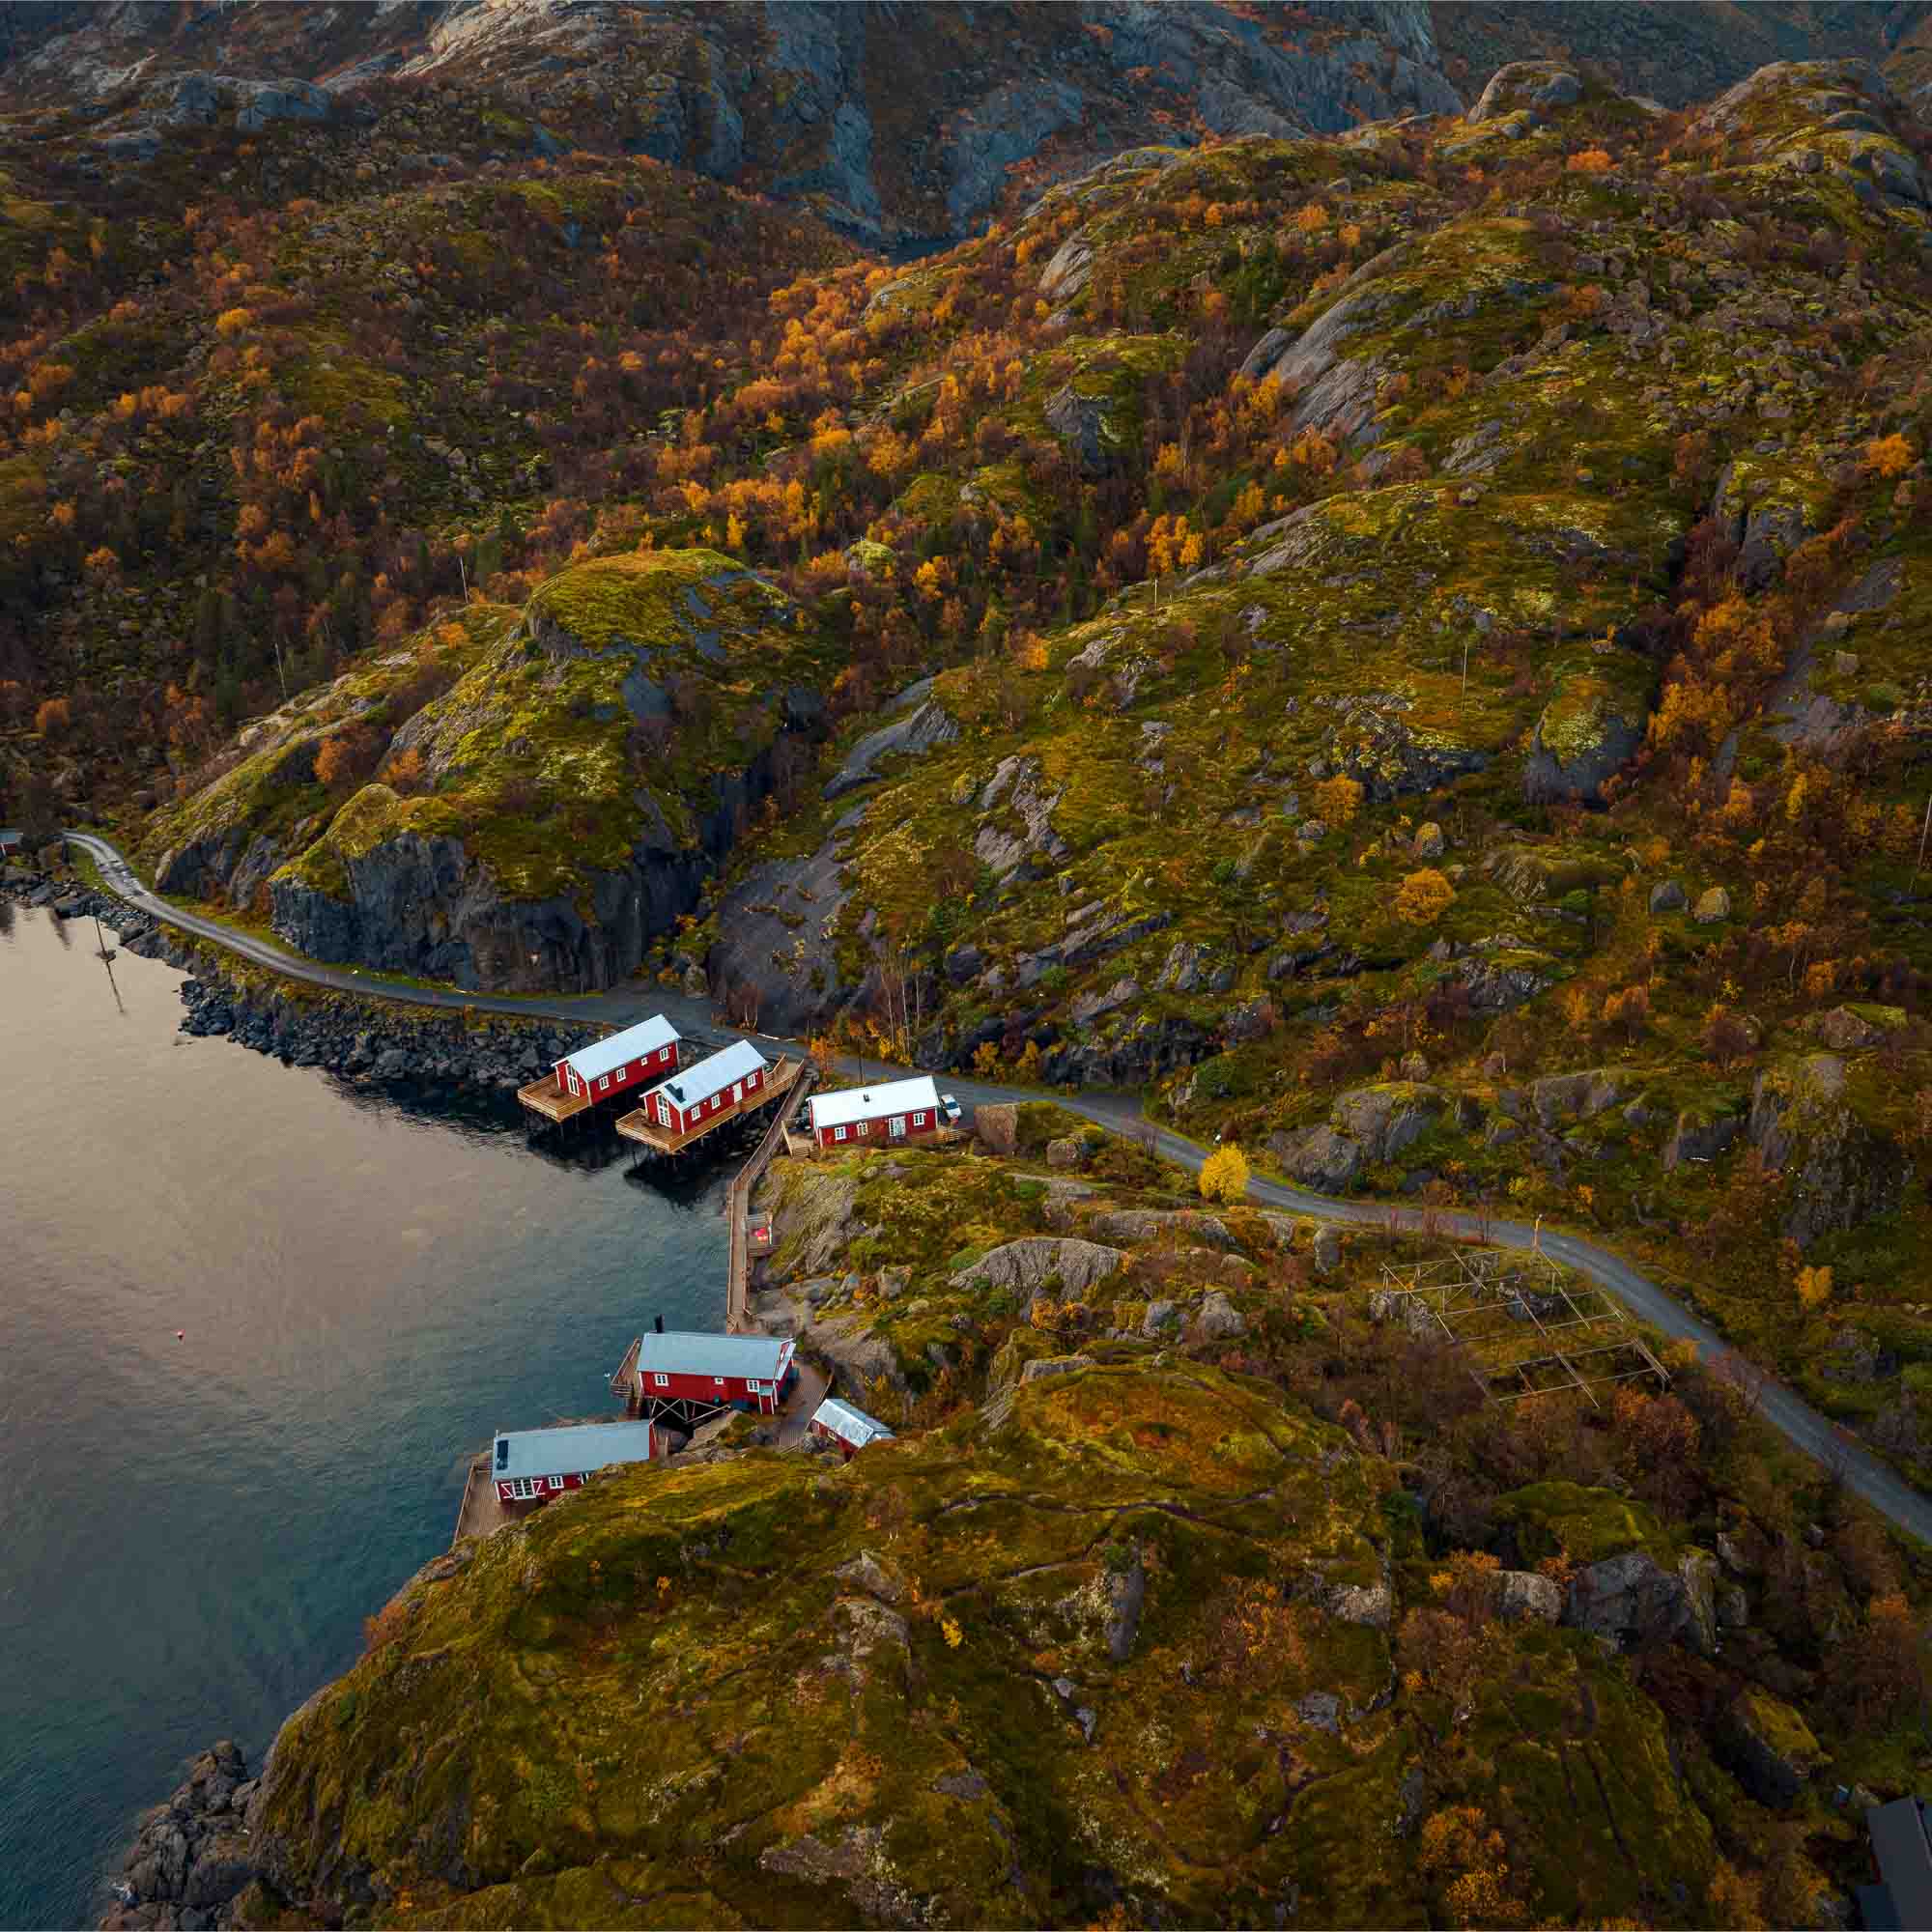 Aerial view of traditional red Norwegian cabins by the rocky shore of Nusfjord, Lofoten, amidst autumn-colored vegetation.